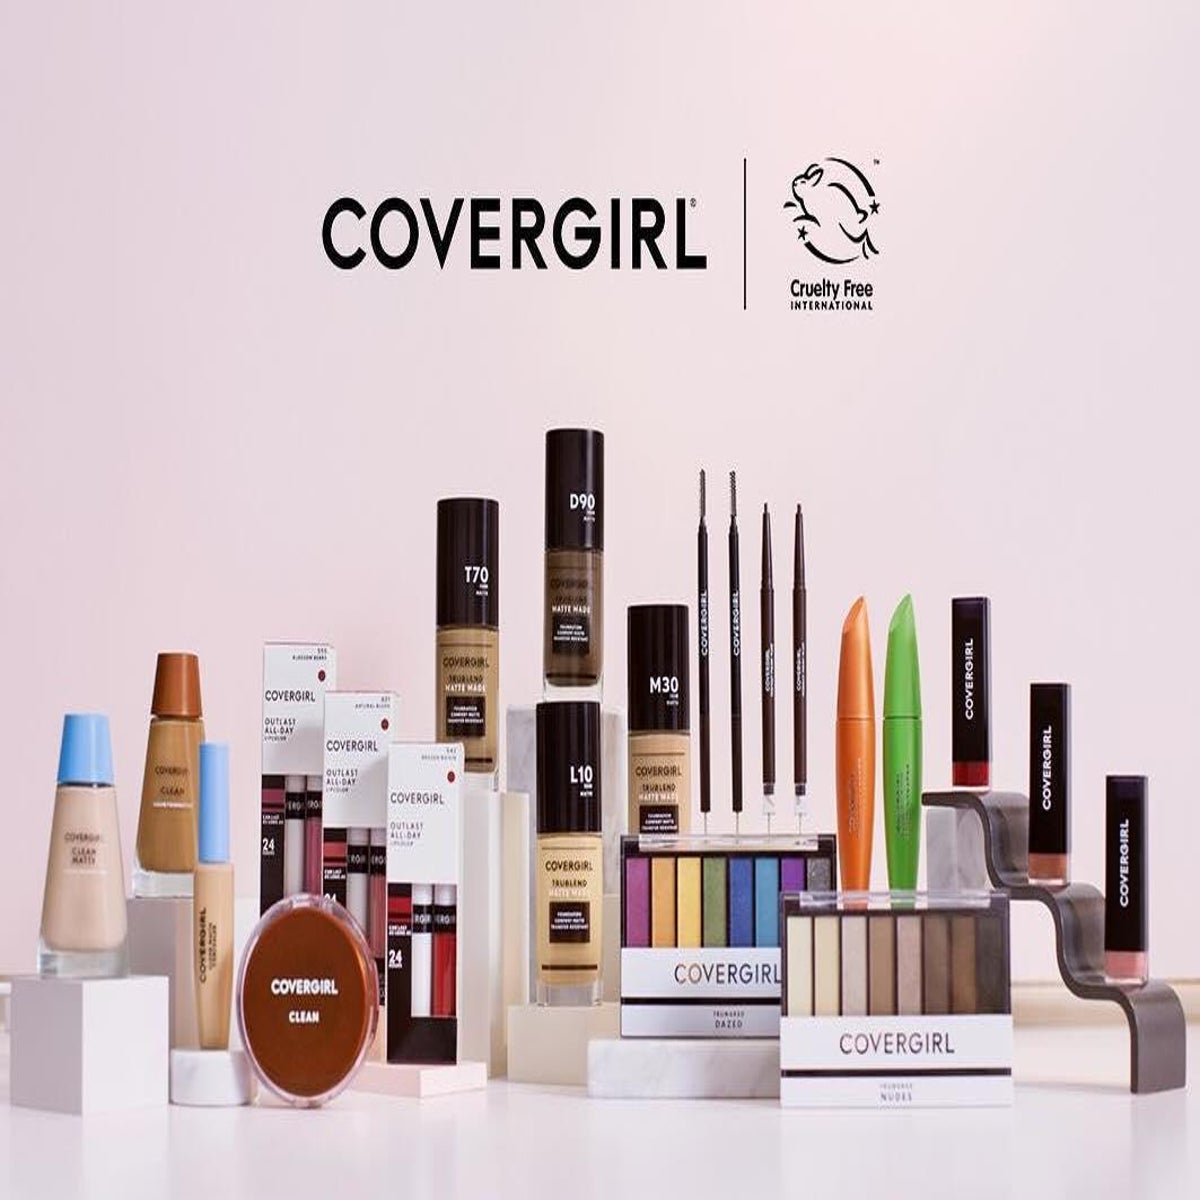 CoverGirl biggest makeup brand to receive cruelty-free Leaping Bunny logo The Independent | The Independent